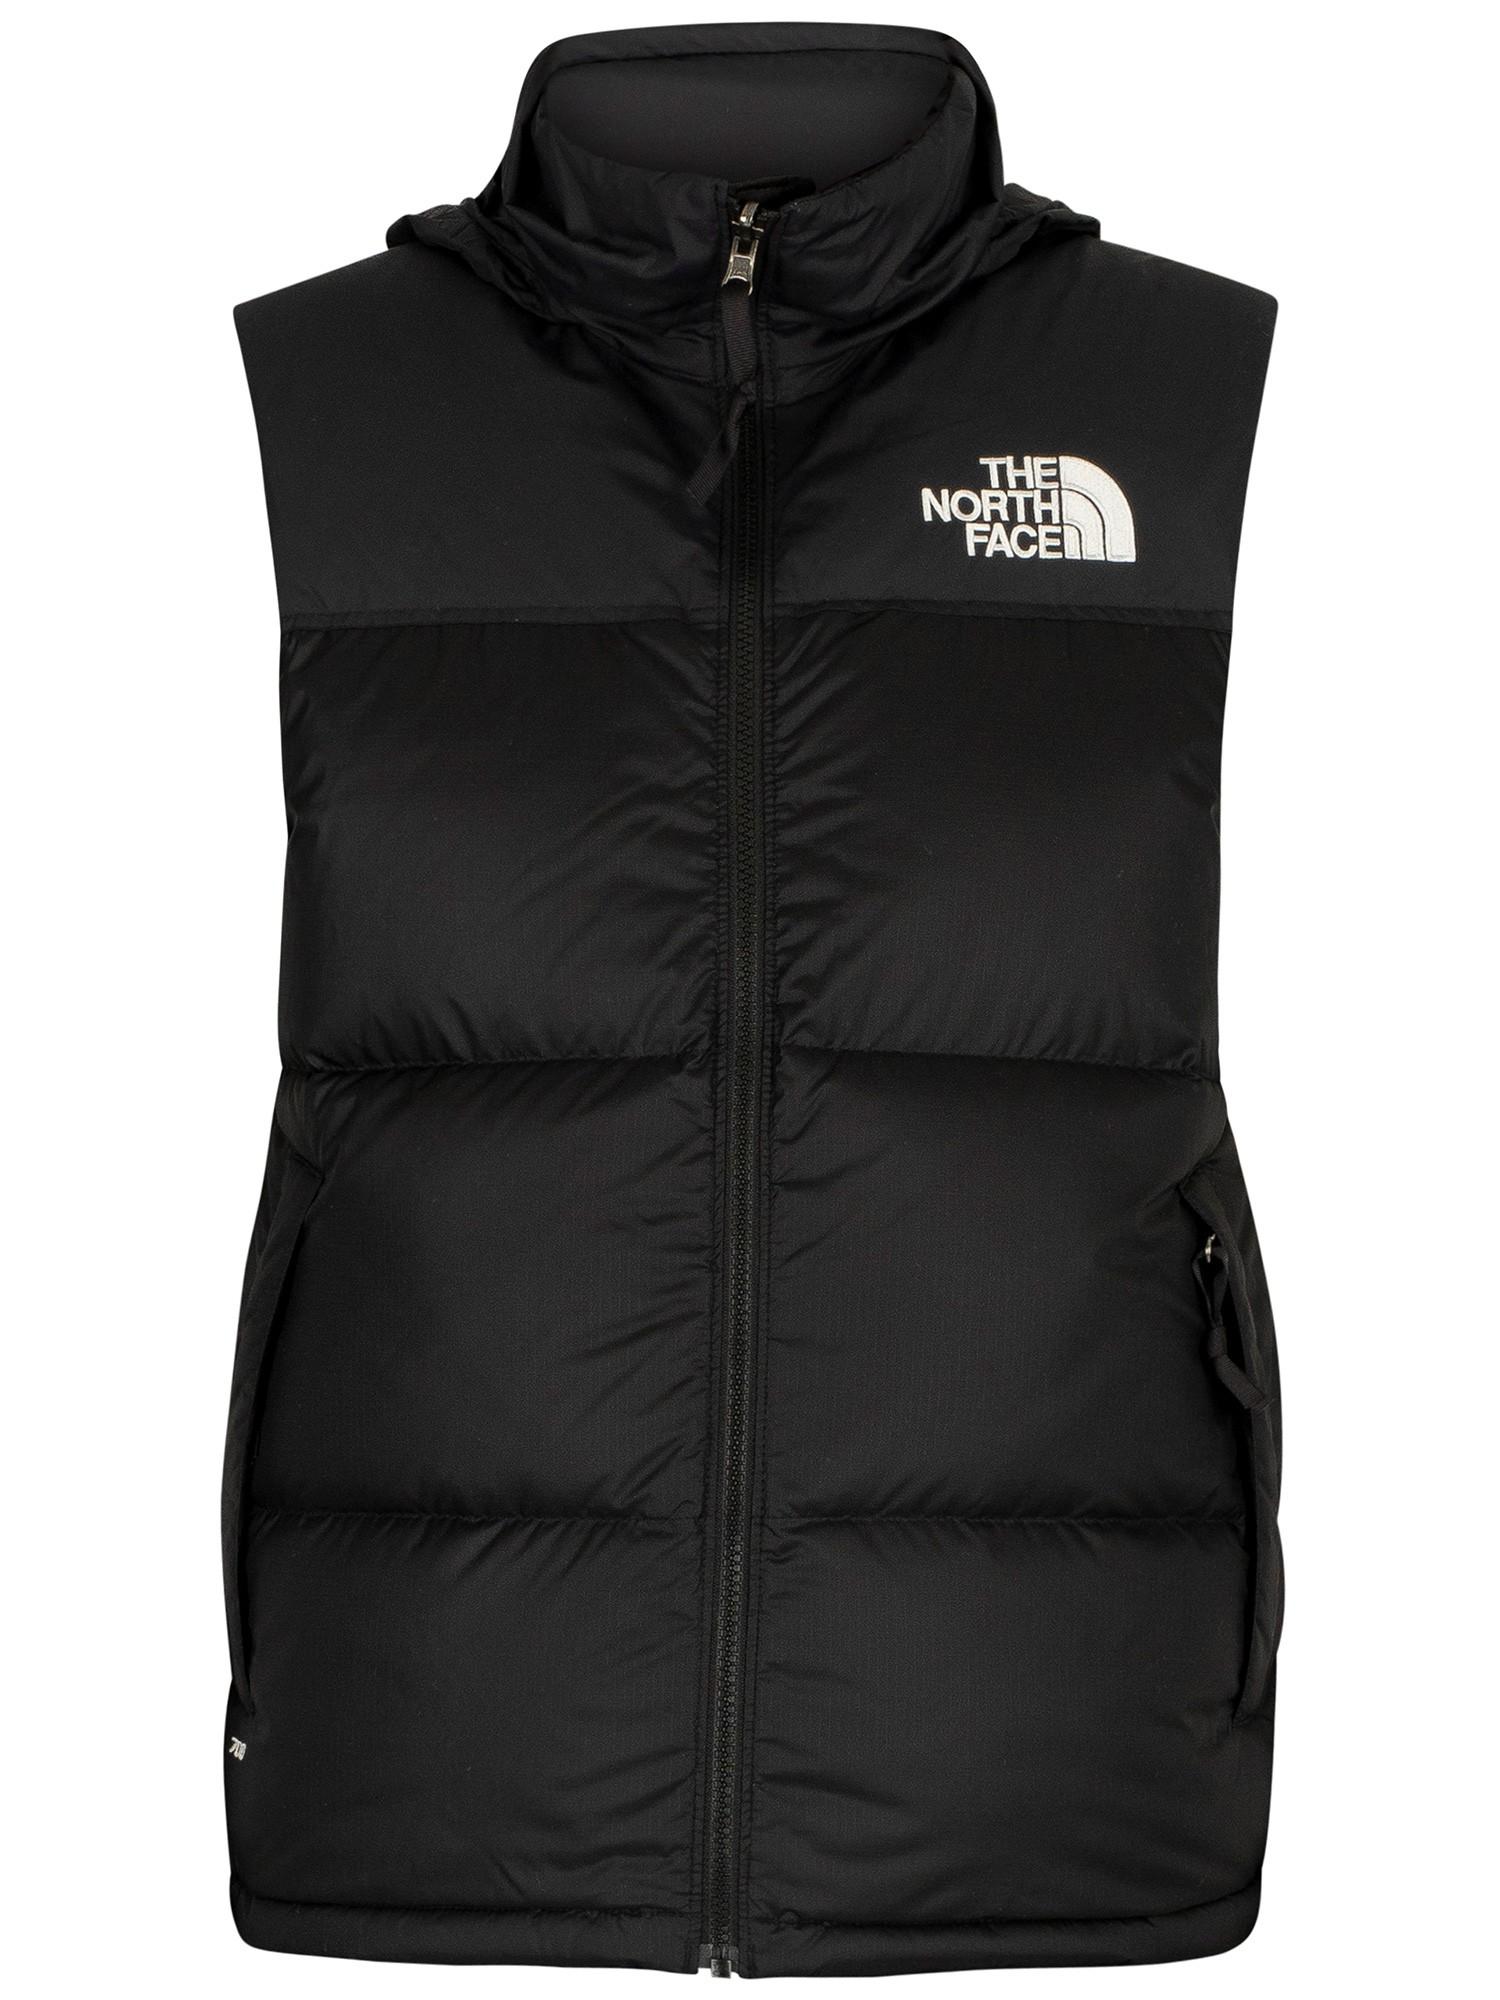 The North Face Synthetic 1996 Retro Nuptse Gilet in Black for Men - Lyst